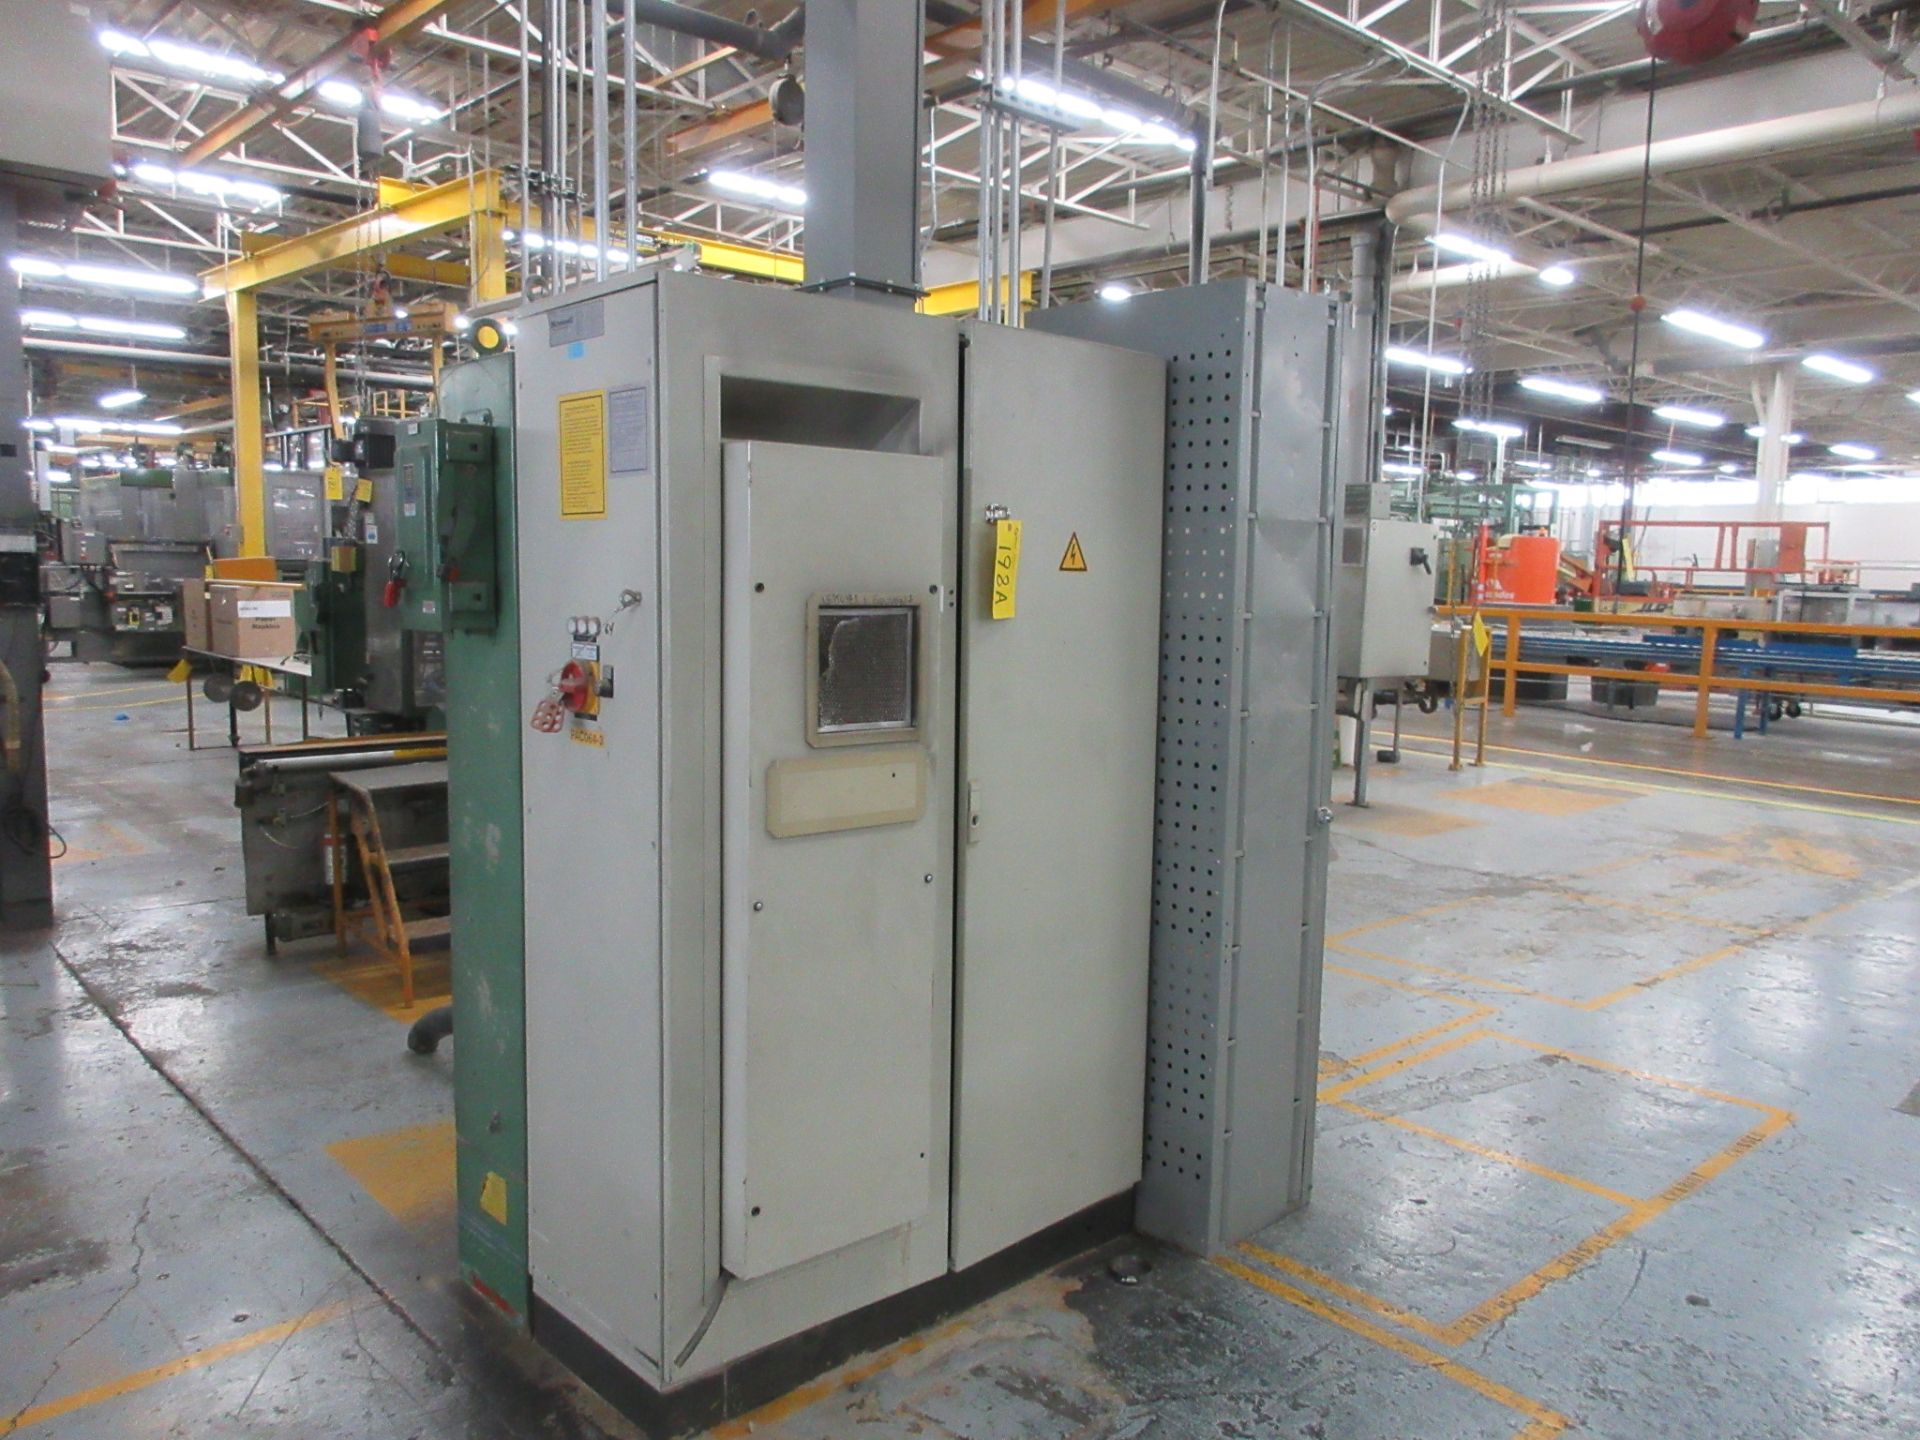 2002 SENNING WRAPPER ELECTRICAL CABINET (LAVAL 64) - Image 2 of 9